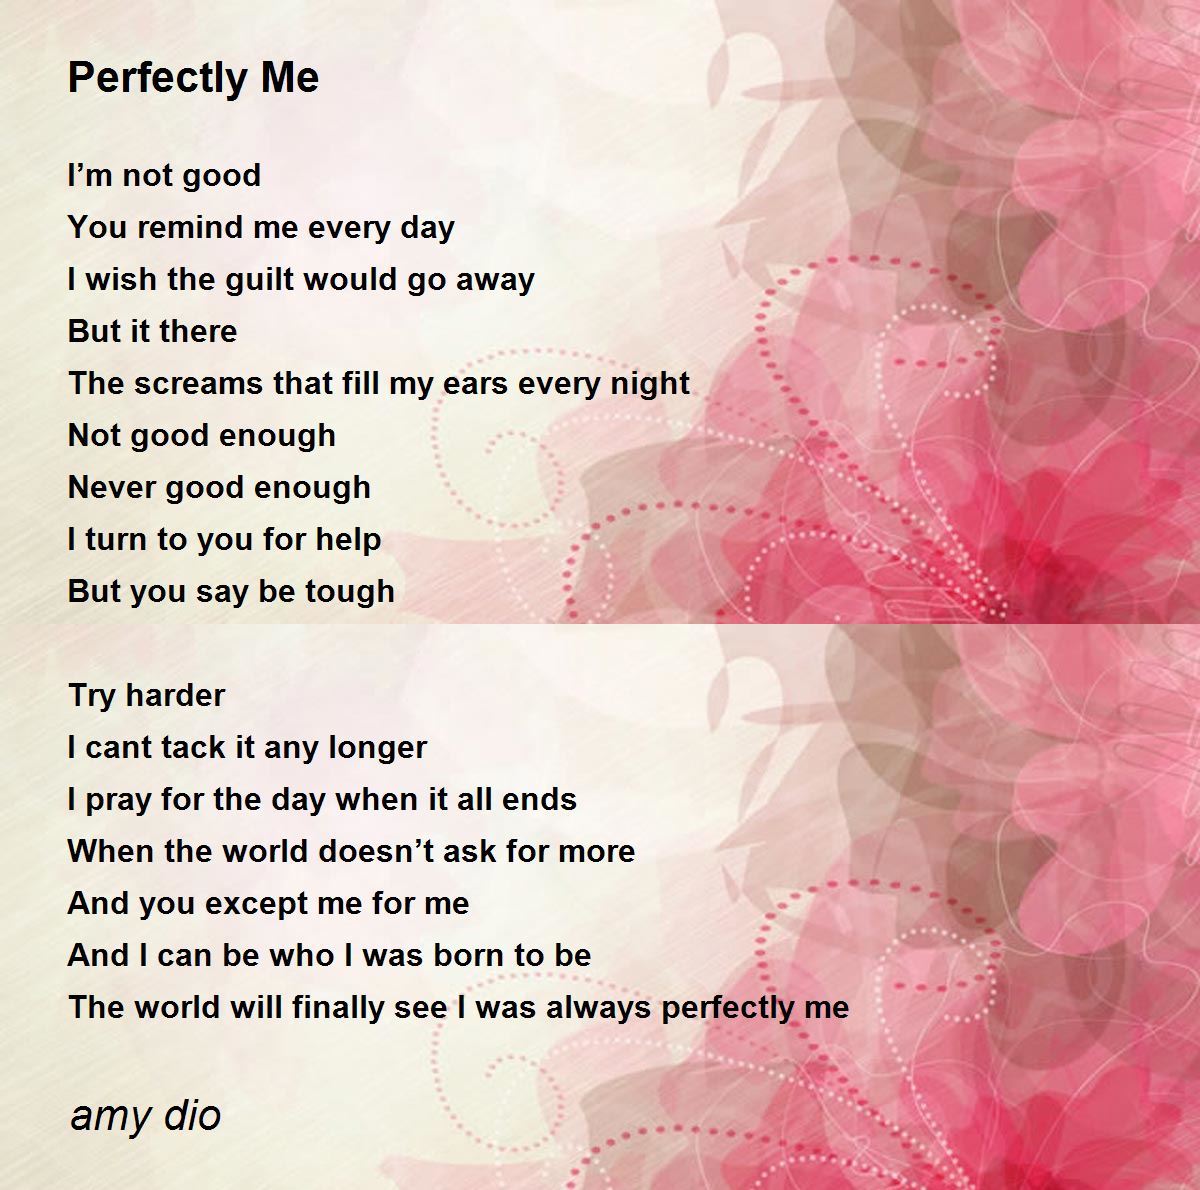 Perfectly Me - Perfectly Me Poem by amy dio